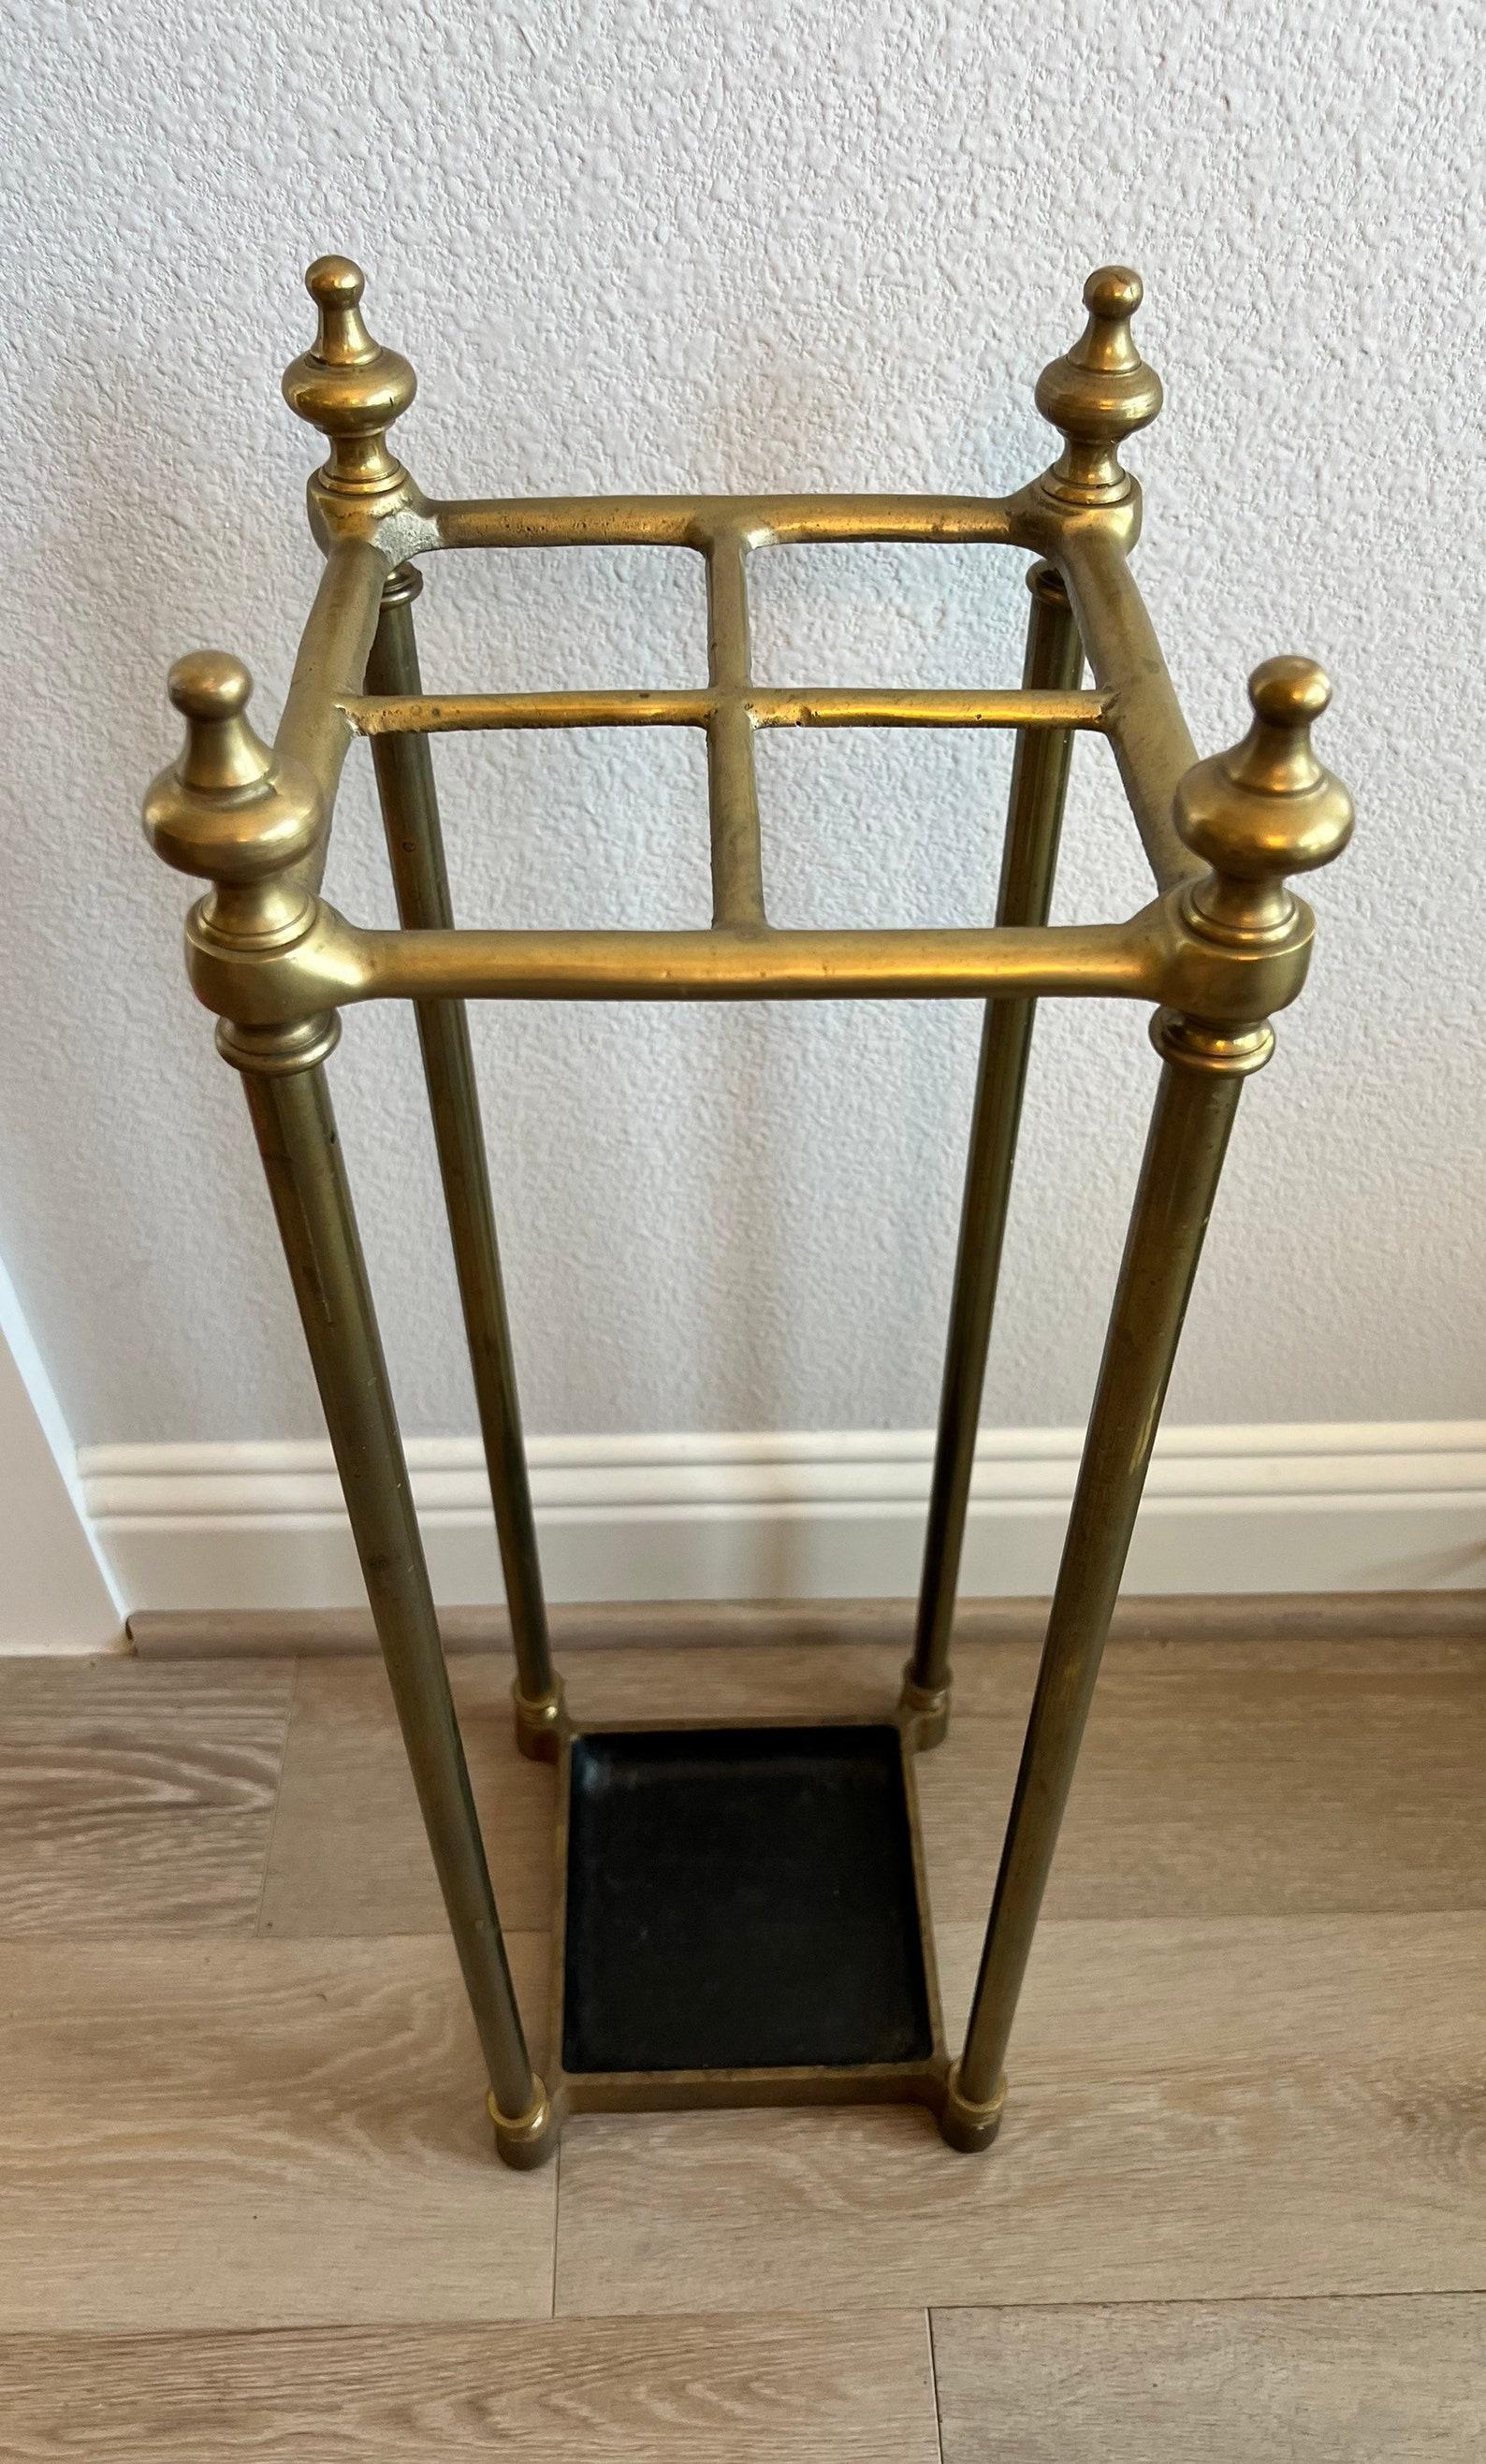 A fine mid-19th century Victorian umbrella stand with a brass top divided into four sections to hold either walking sticks, canes or umbrellas. circa 1860s.

The nicely patinated brass tubular four post frame comes together to form a square shaped